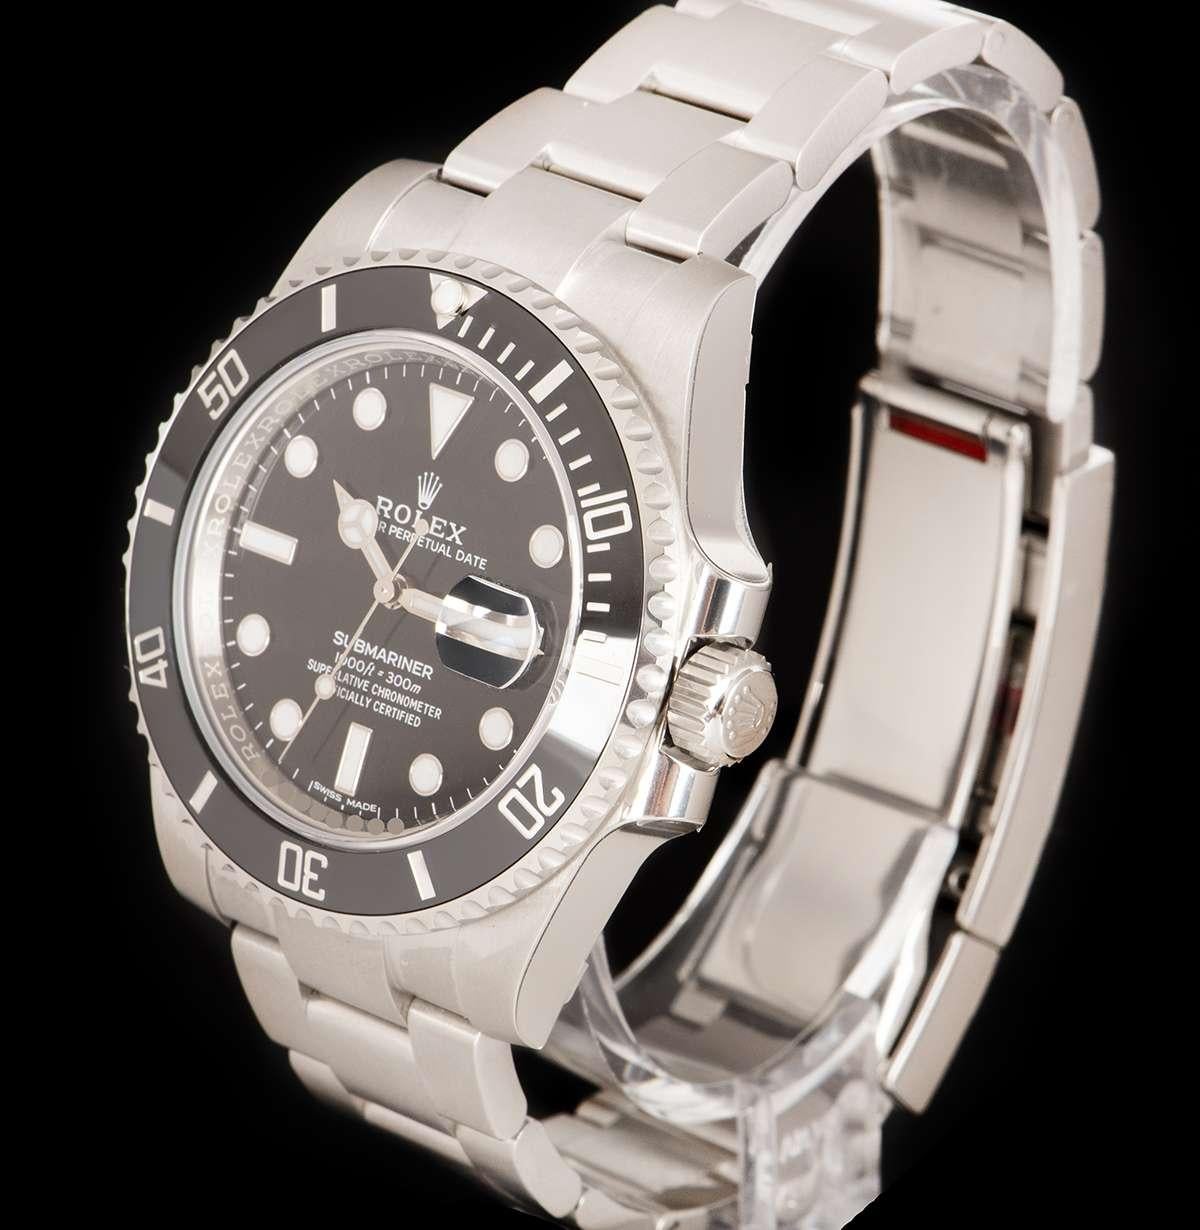 The predecessor to the 126610LN, this Submariner Date 40mm in stainless steel is in unworn condition. It features a black dial and a ceramic unidirectional rotatable bezel with 60-minute graduations. Fitted with an Oyster bracelet and Oysterlock